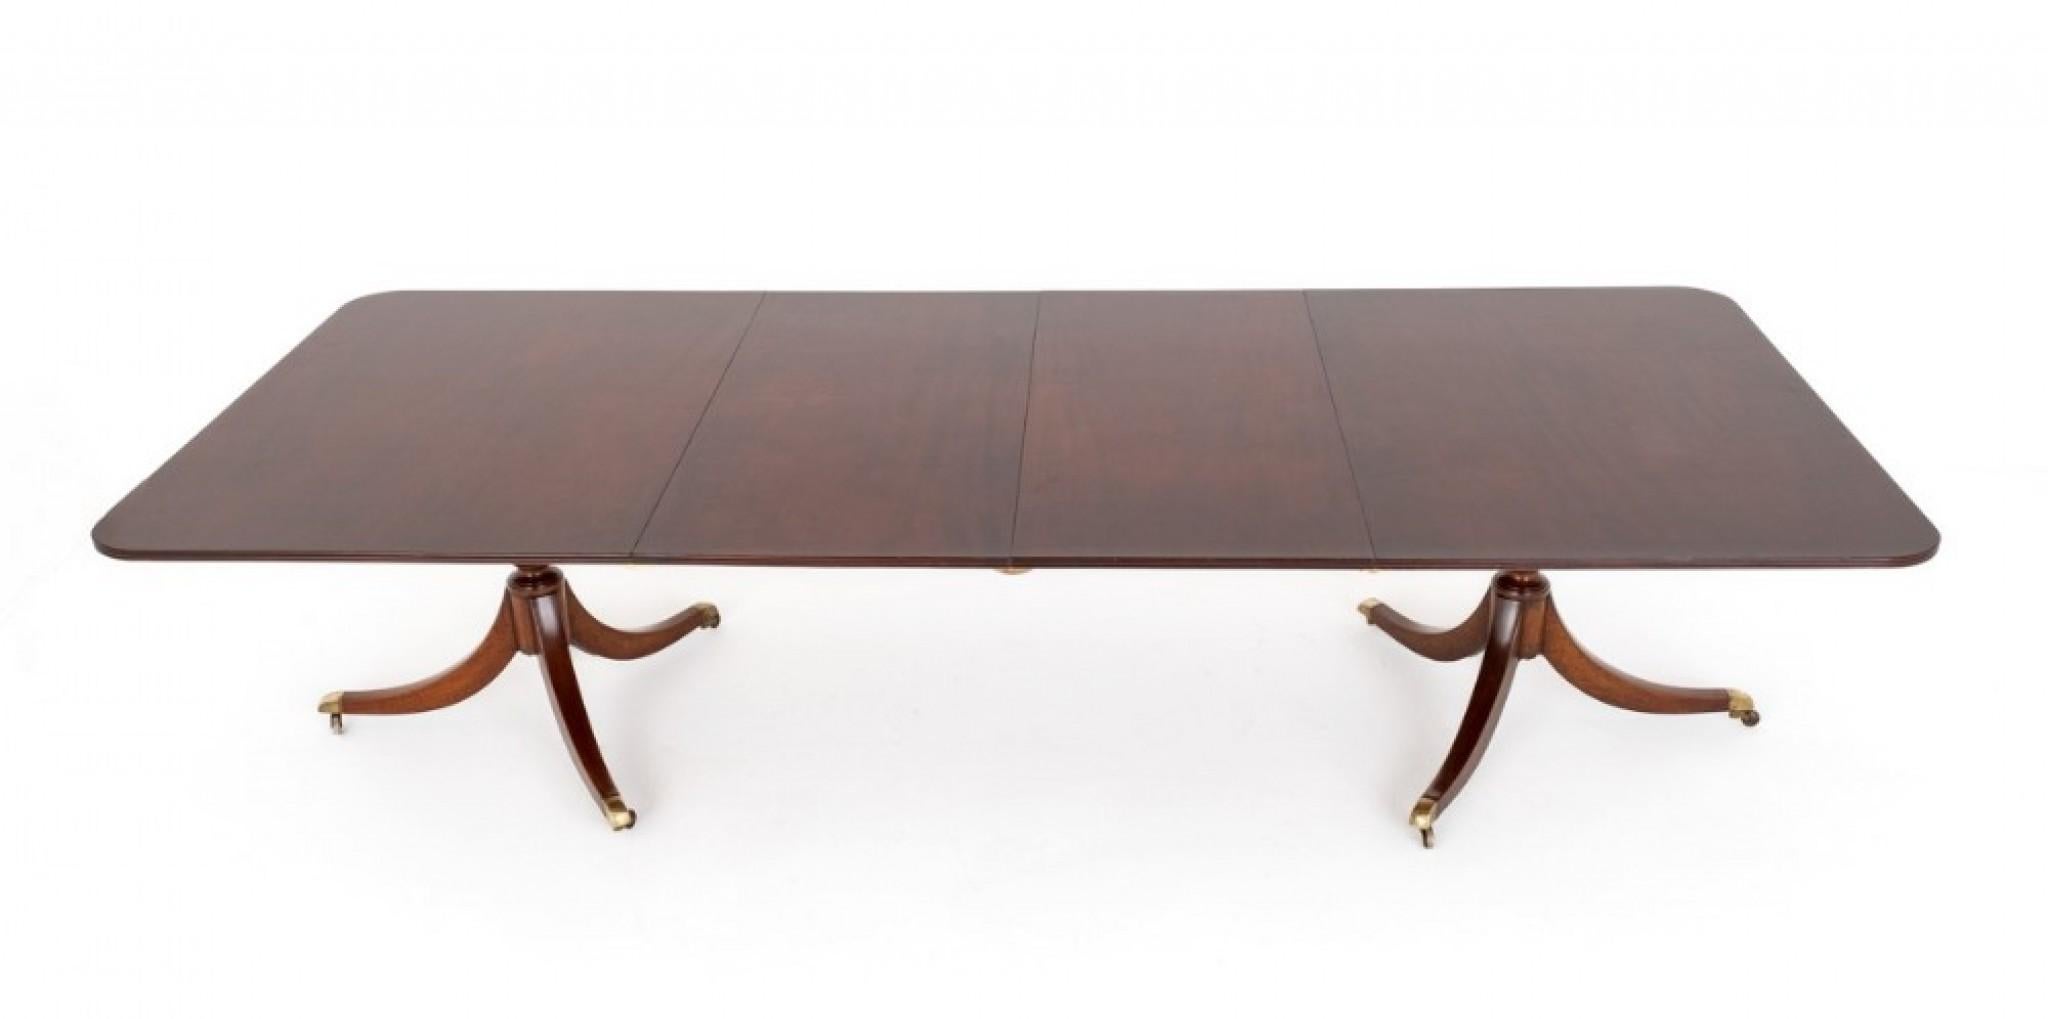 Regency Dining Table - Mahogany 2 Pedestal Period Antique For Sale 5